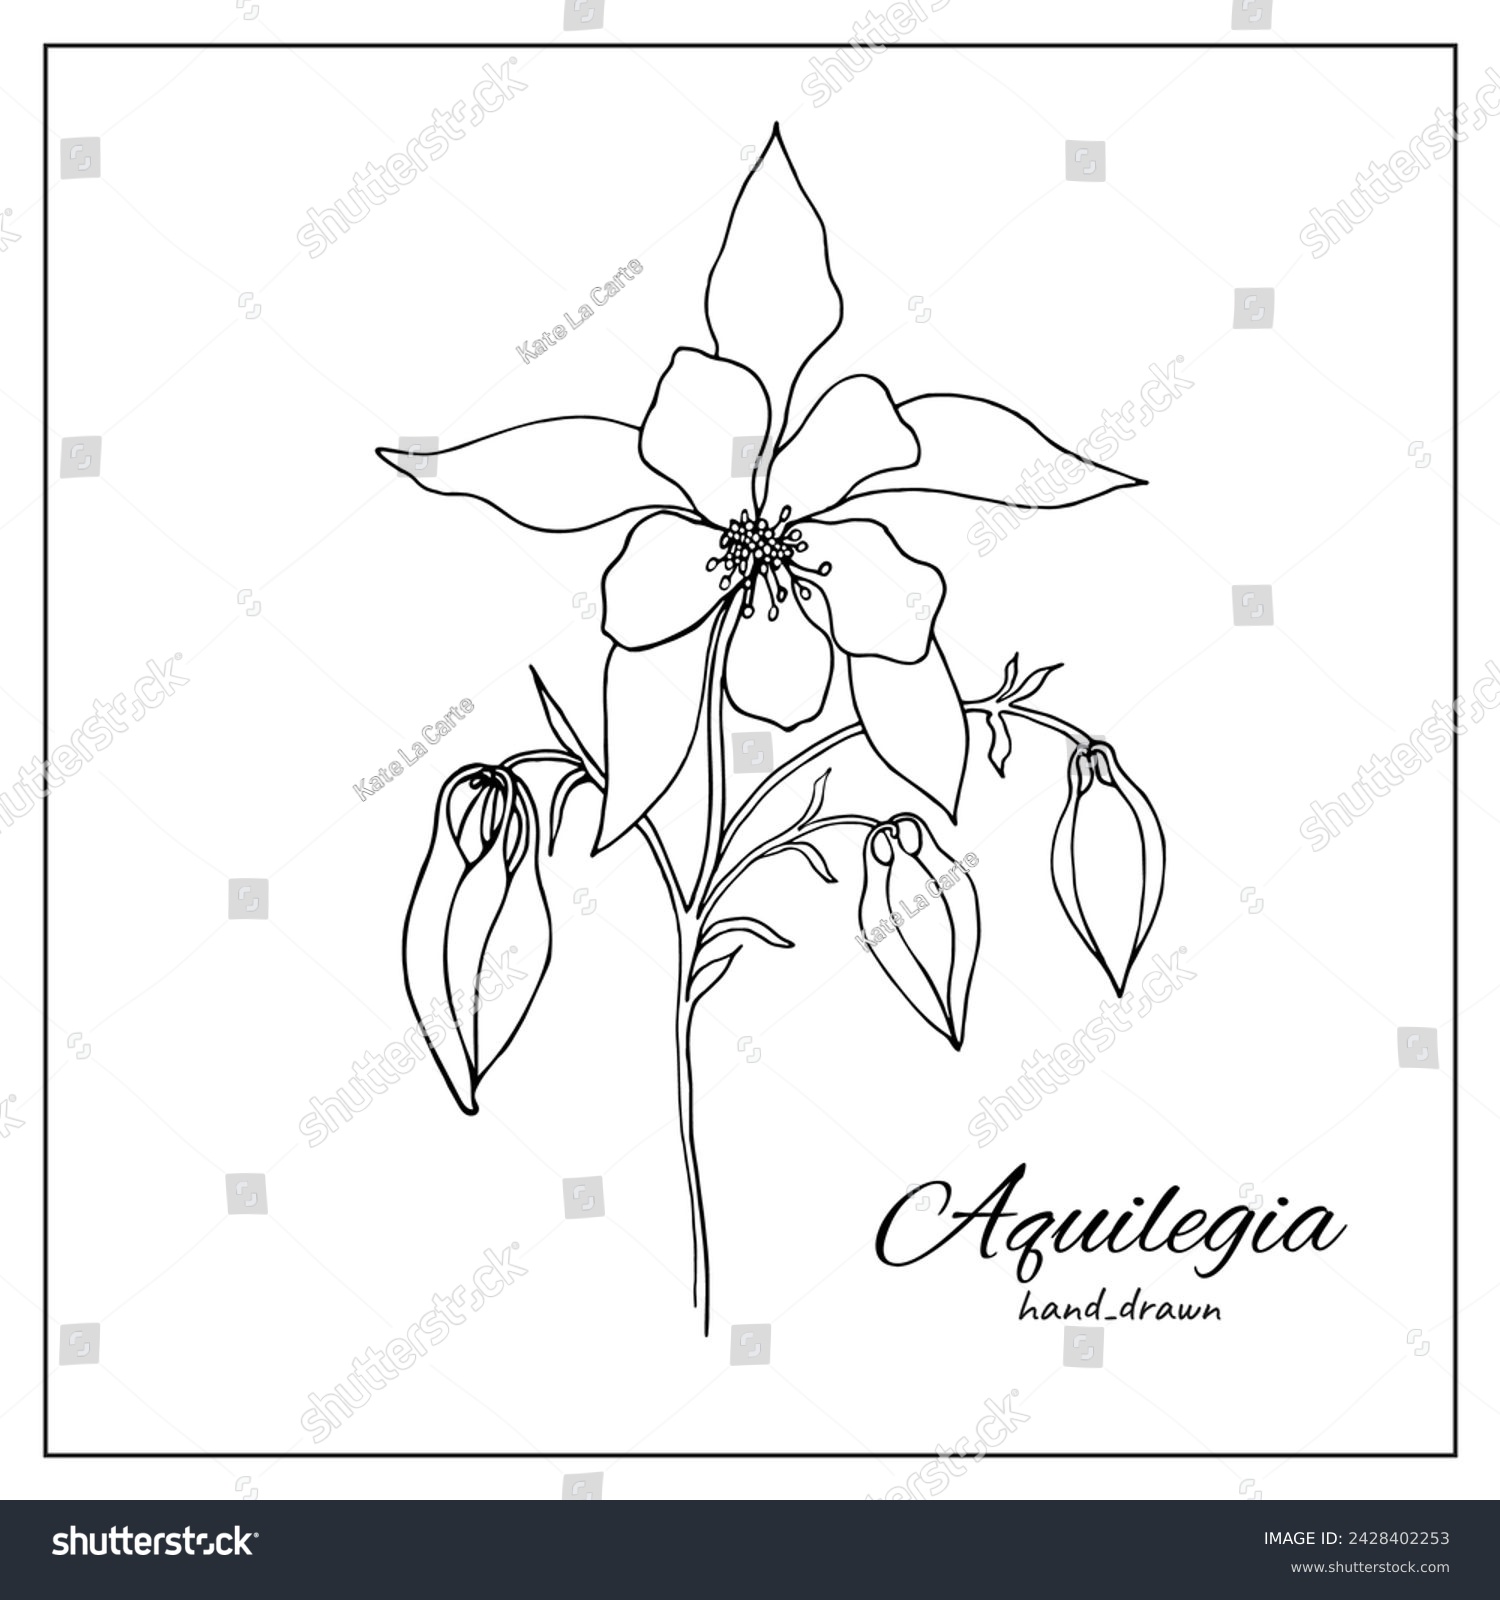 Columbine aquilegia flower blossom. Isolated vector botanical illustration: retro, vintage, hand drawn, black and white, outline. For coloring book, botanical illustration, design, decoration. #2428402253